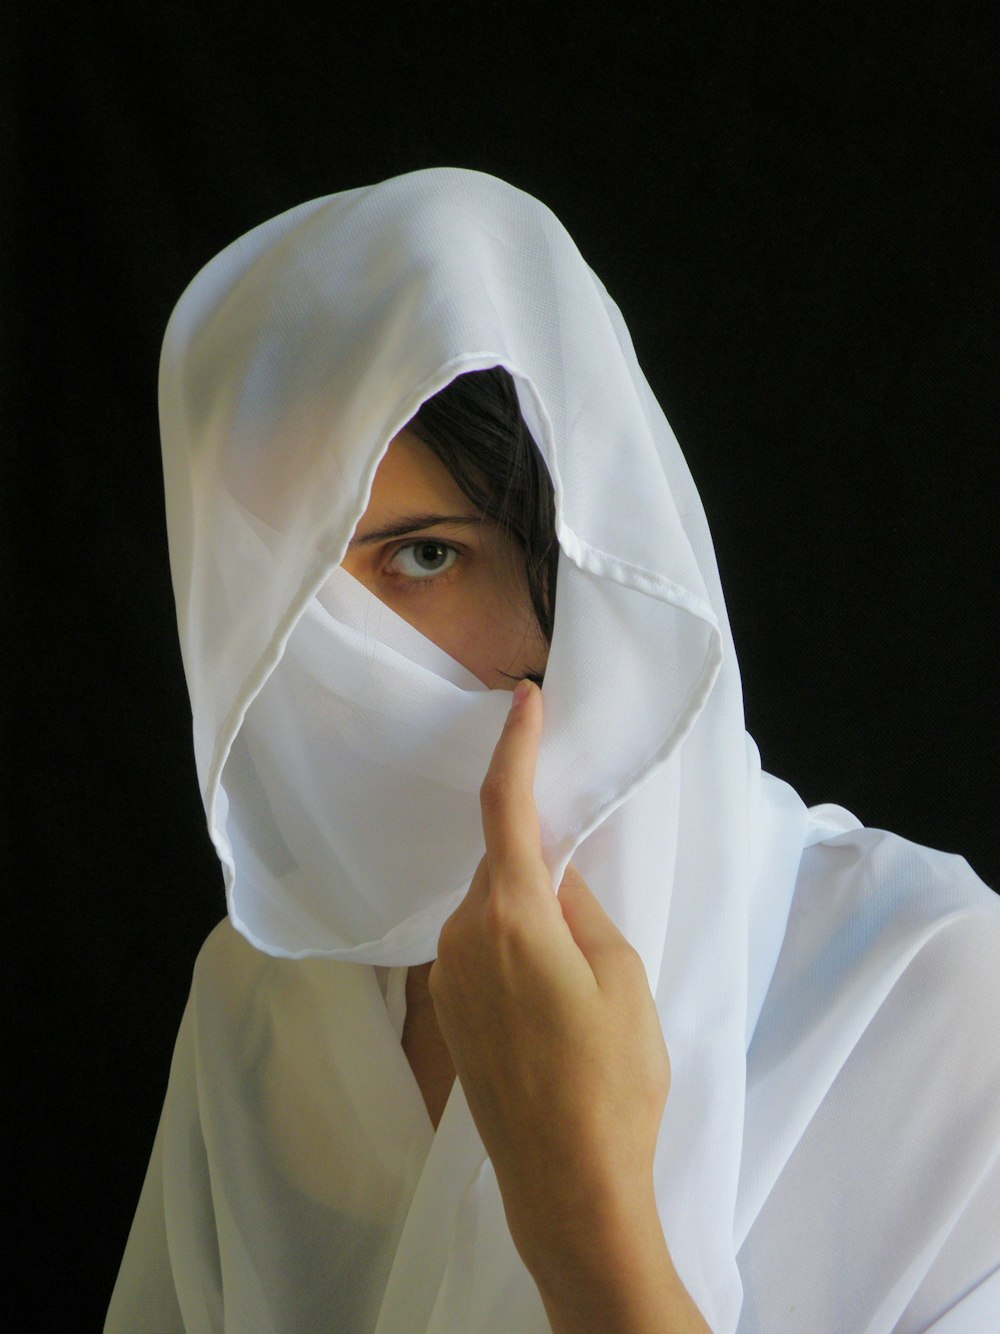 woman wearing white headscarf covering her face